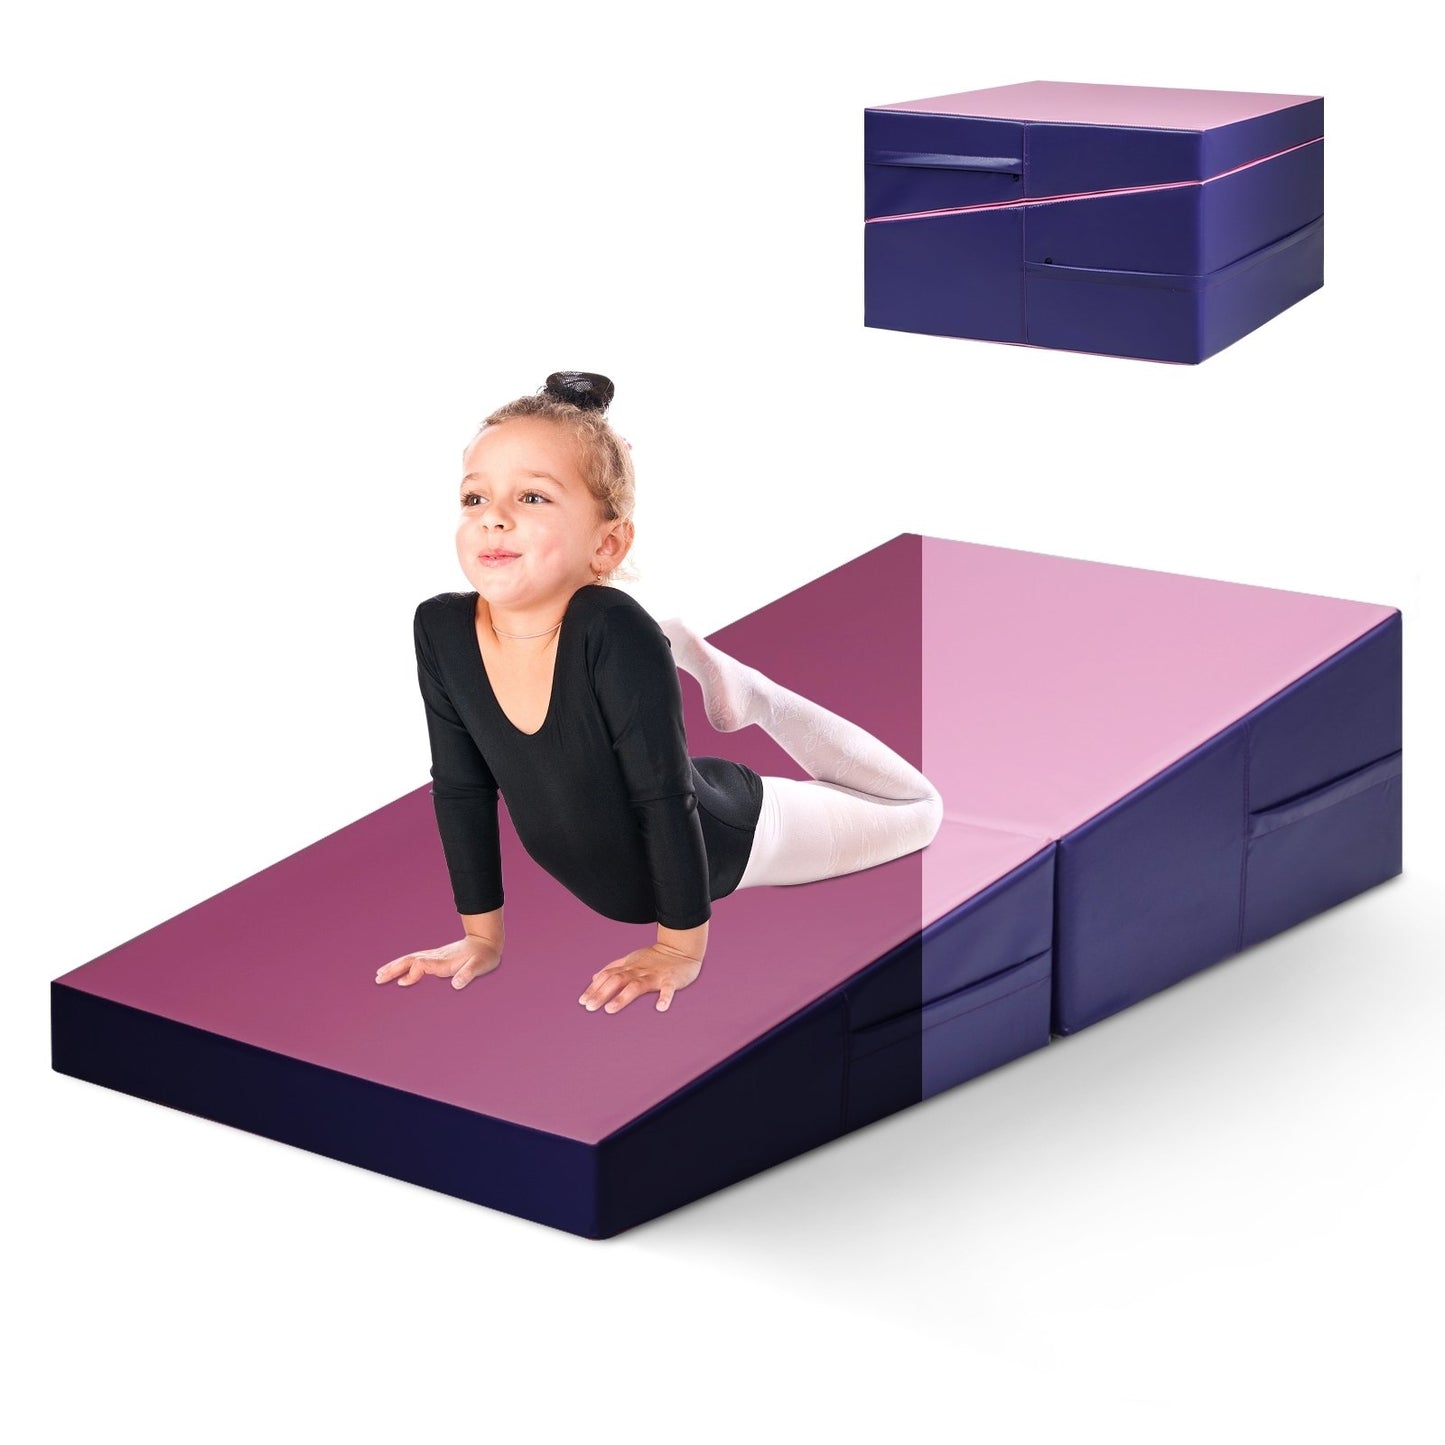 Tumbling Incline Gymnastics Exercise Folding Wedge Ramp Mat, Pink - Gallery Canada